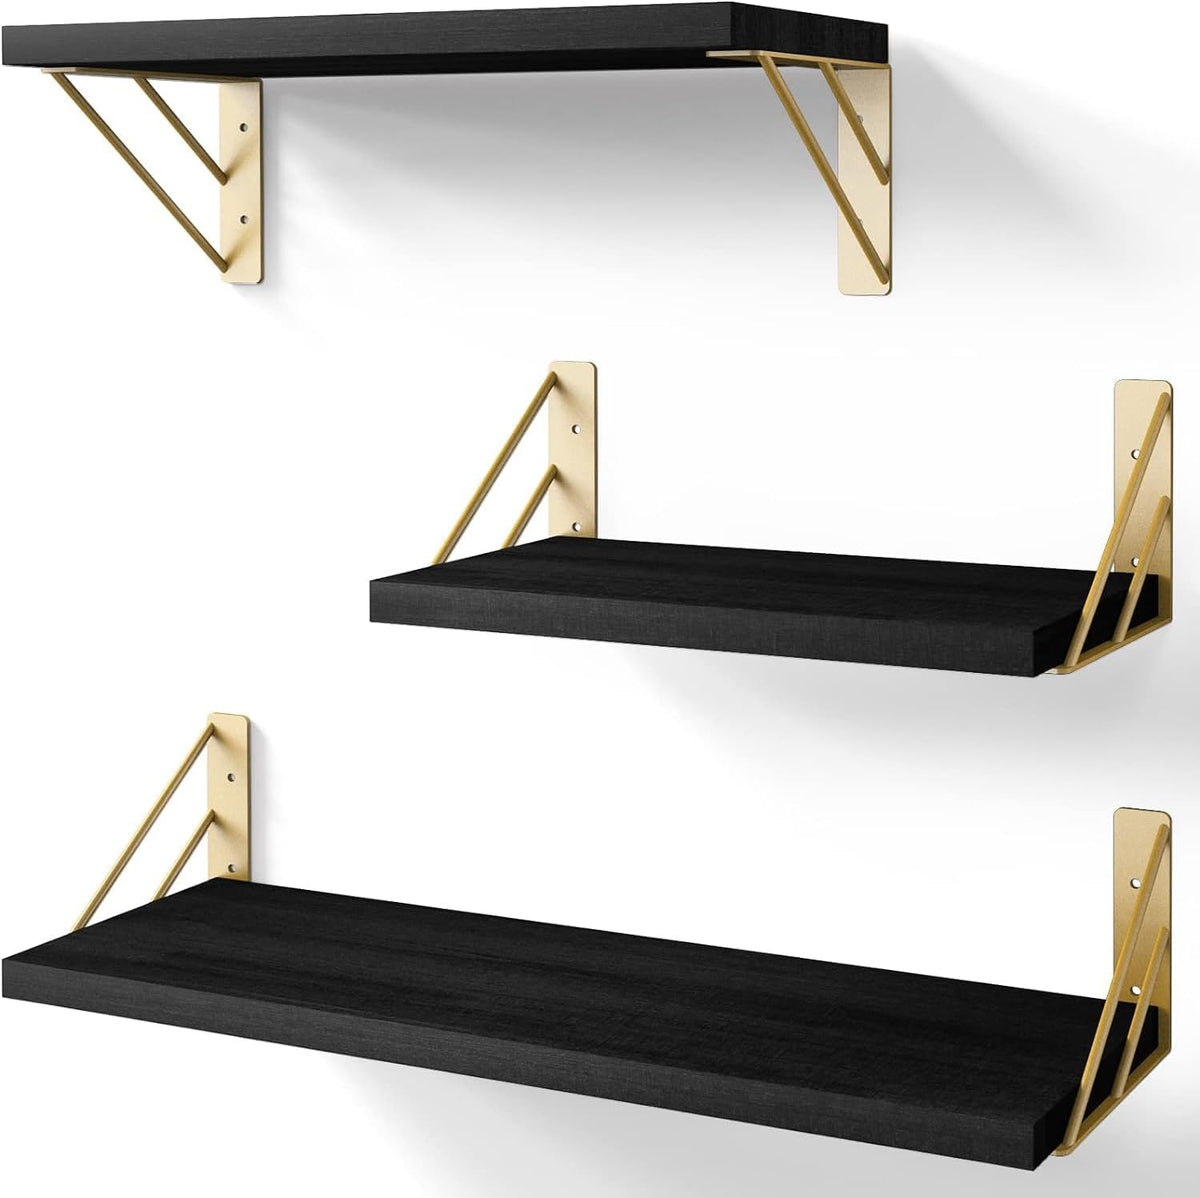 BAYKA Wall Shelves for Bedroom Decor, Floating Shelves for Wall Storage-3pcs-Black and Gold